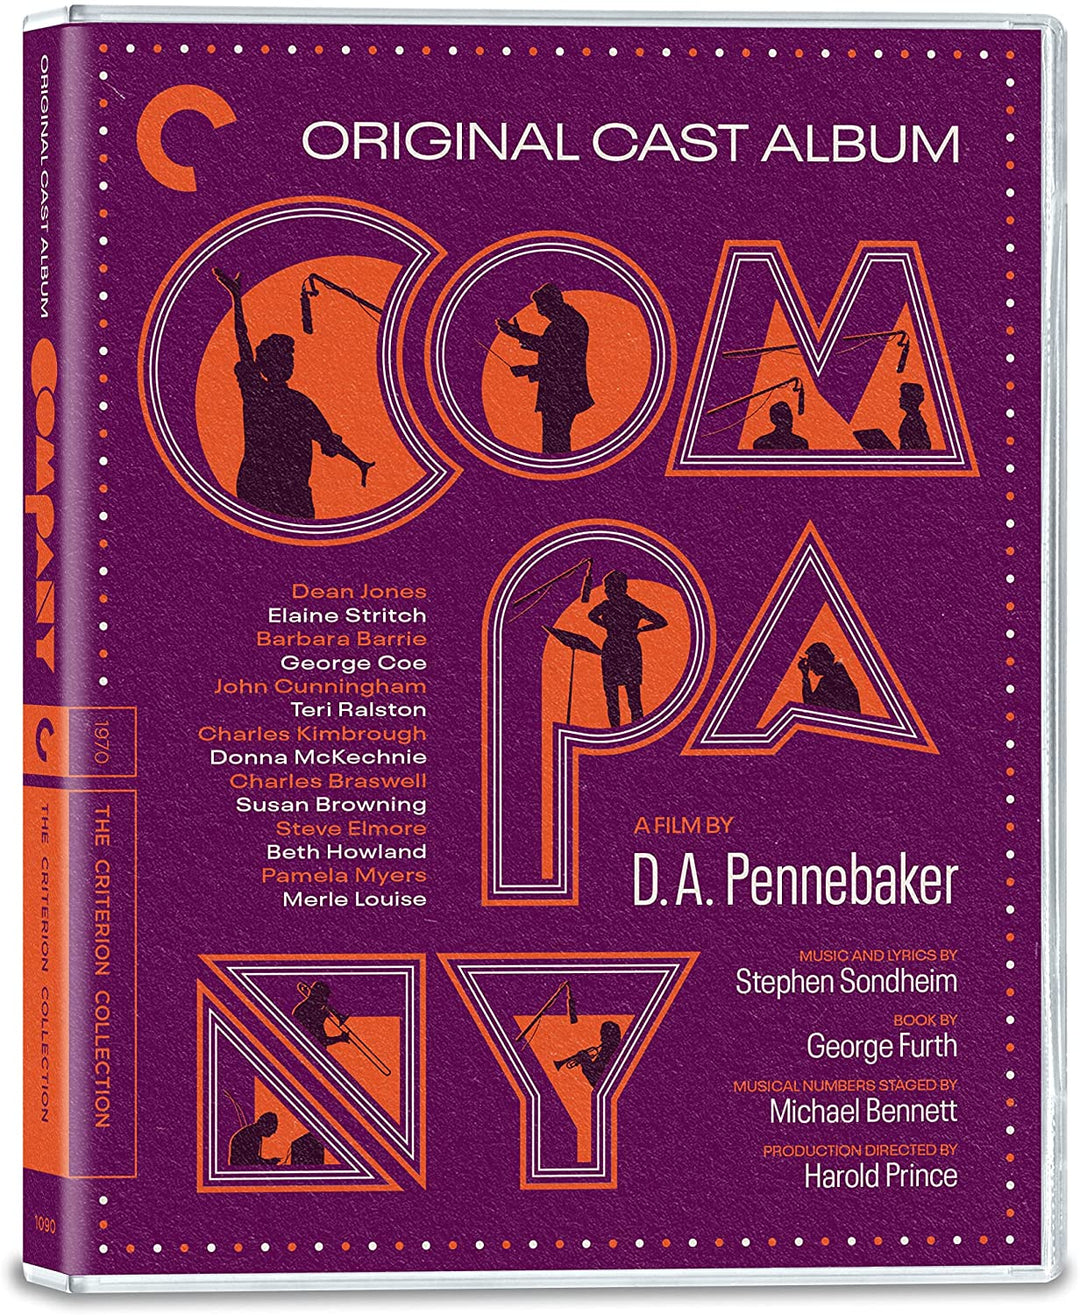 Original Cast Album: Company (1970) (Criterion Collection) UK Only - Musical/Documentary [Blu-ray]